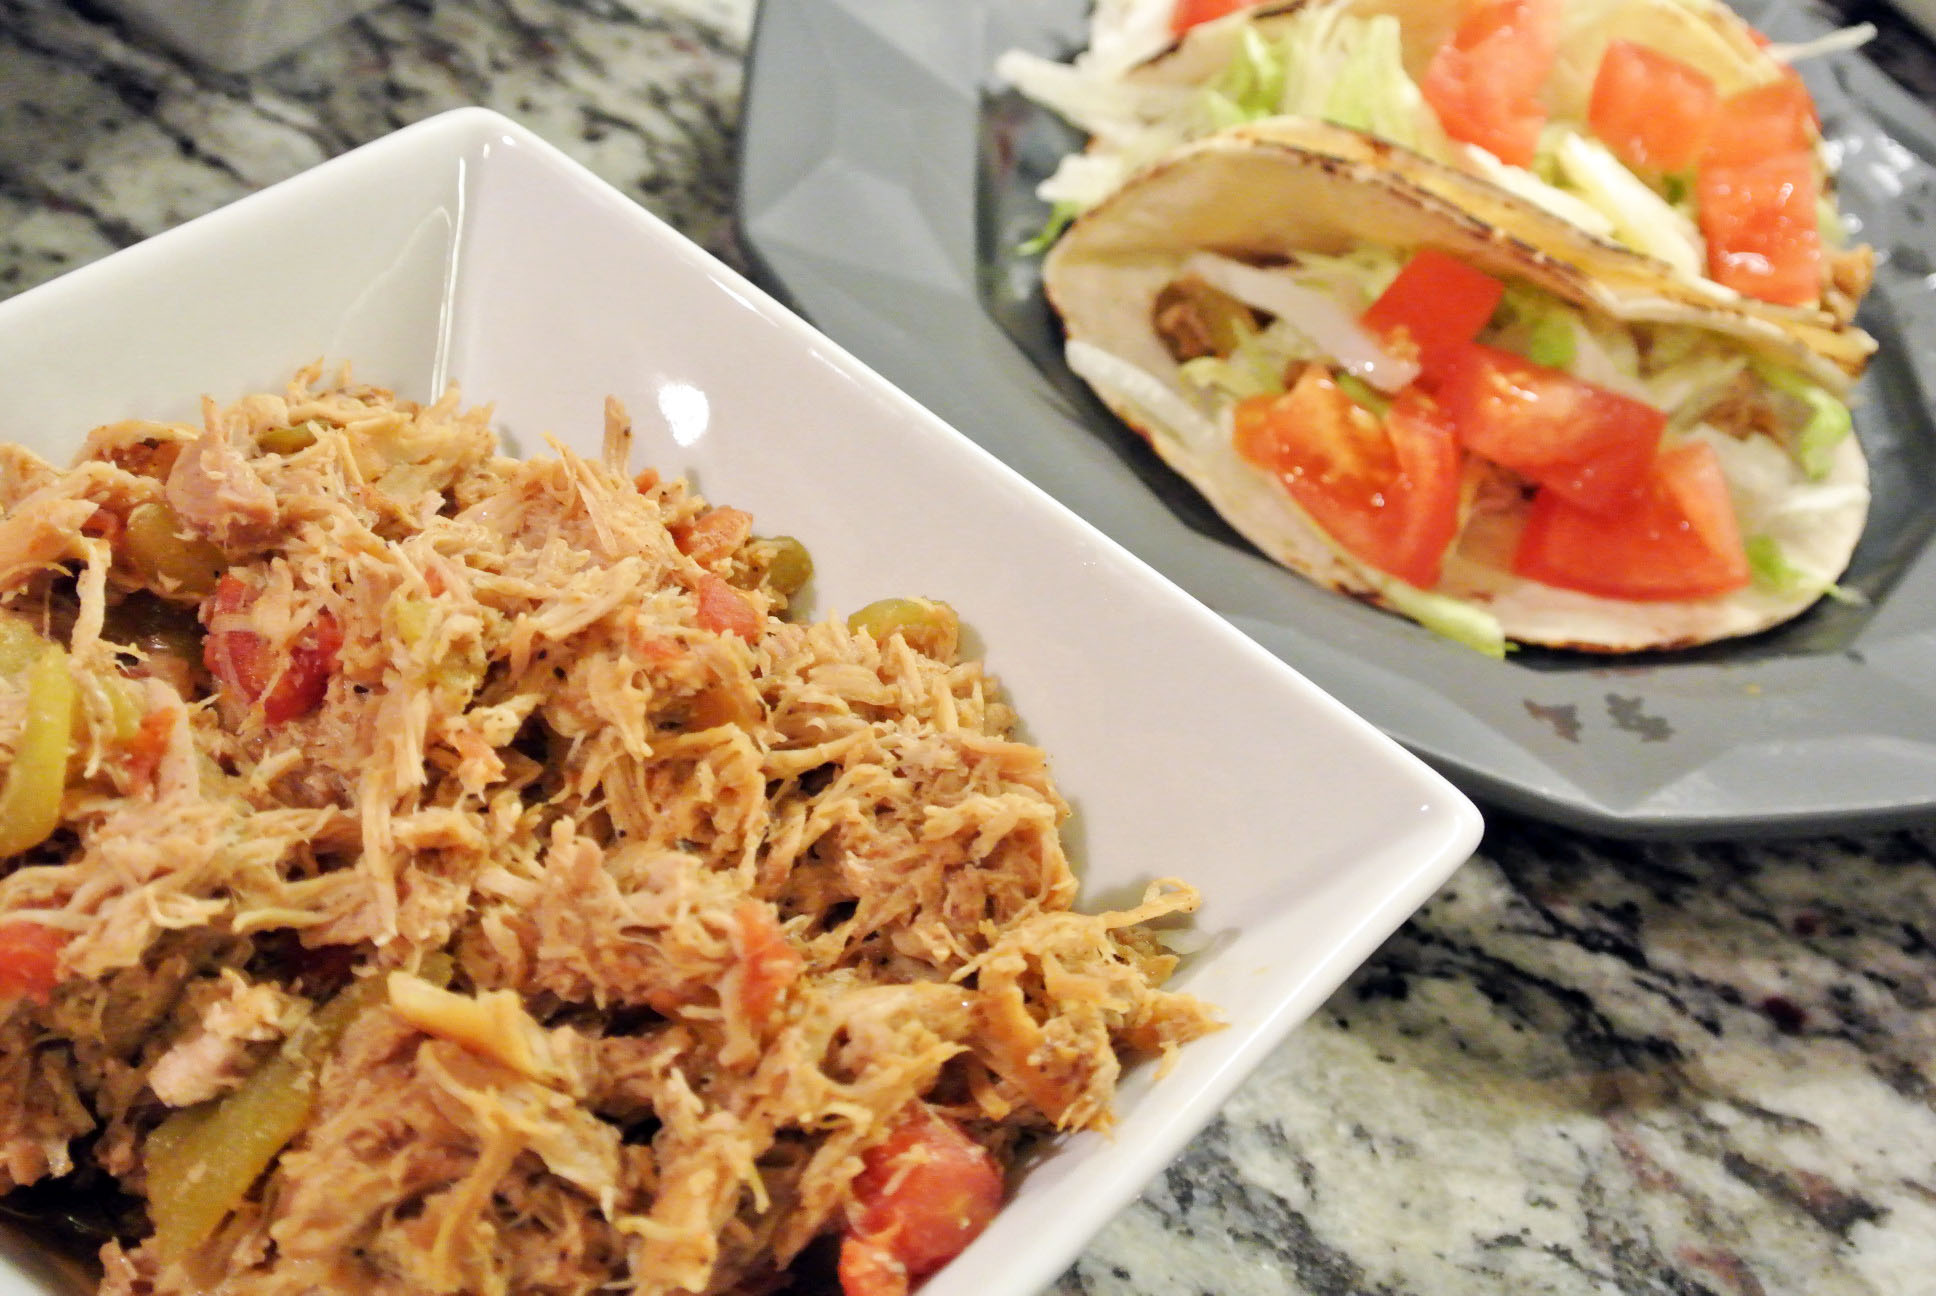 Crock Pot Pulled Chicken Taco - Gluten Free, Soy Free, Dairy Free, Nut Free, Egg Free Recipes